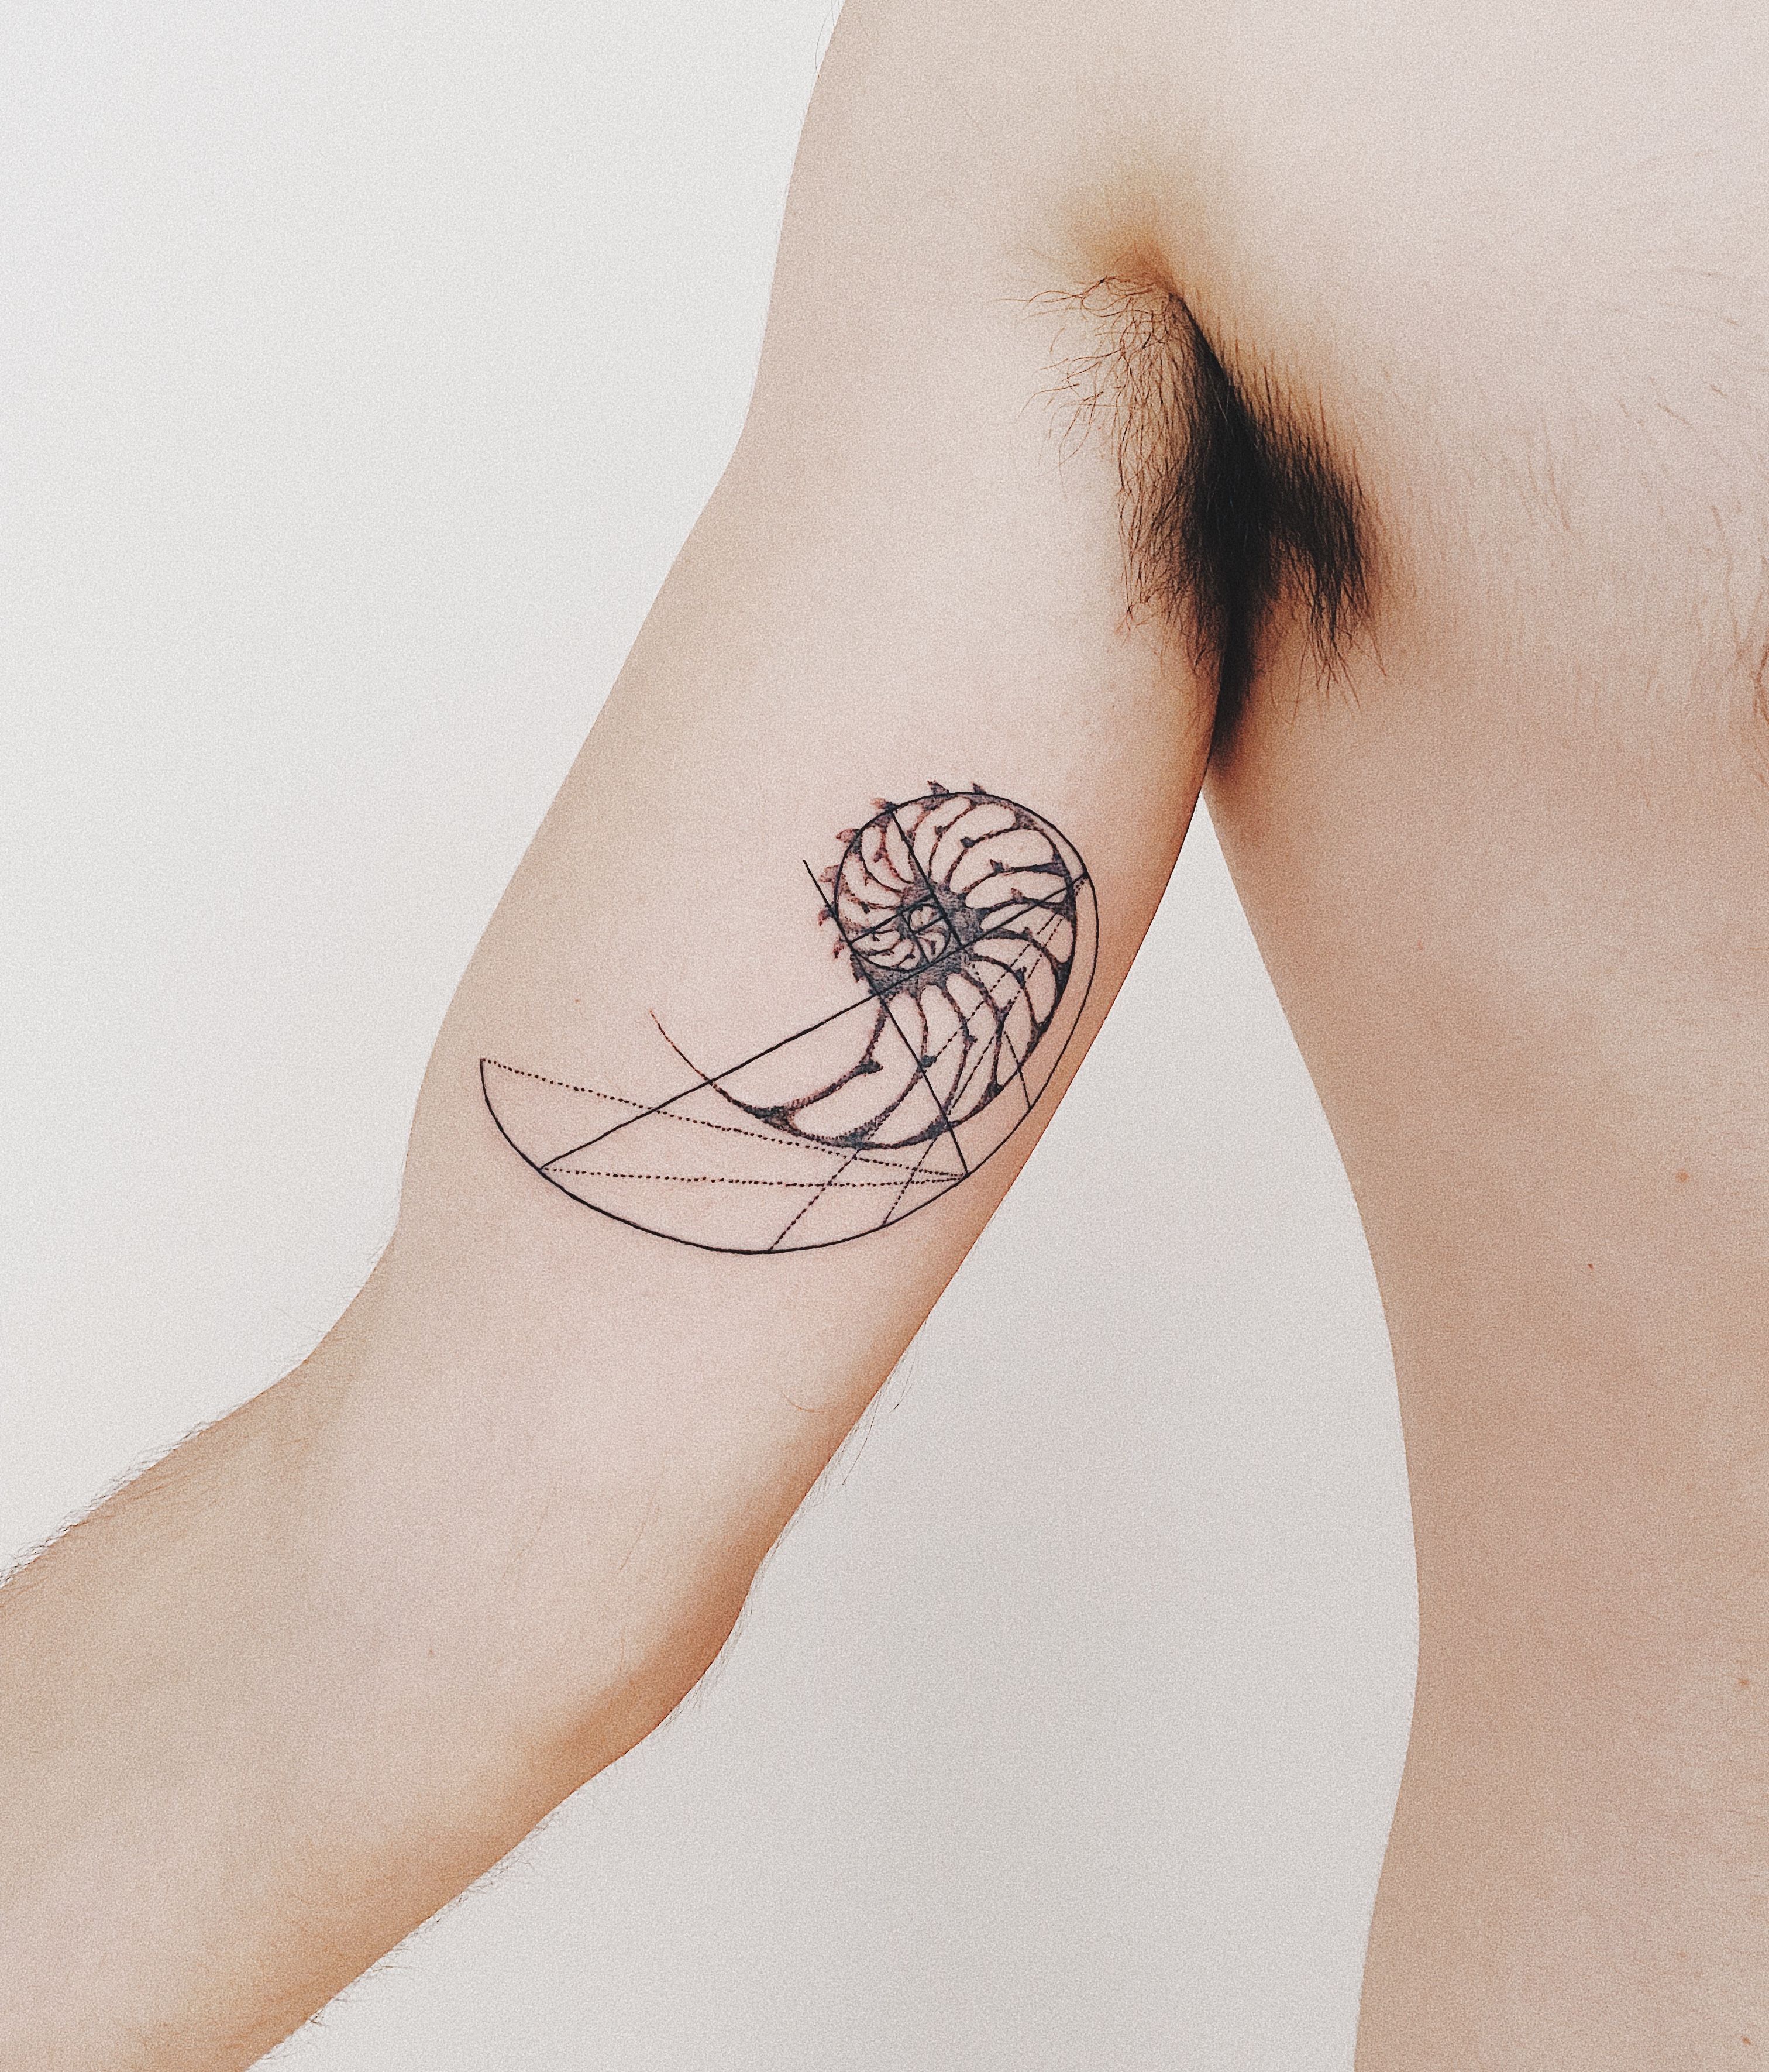 Golden Ratio spiral done by Andi Wywiorski (Black Atlas, Chicago IL) : r/ tattoos